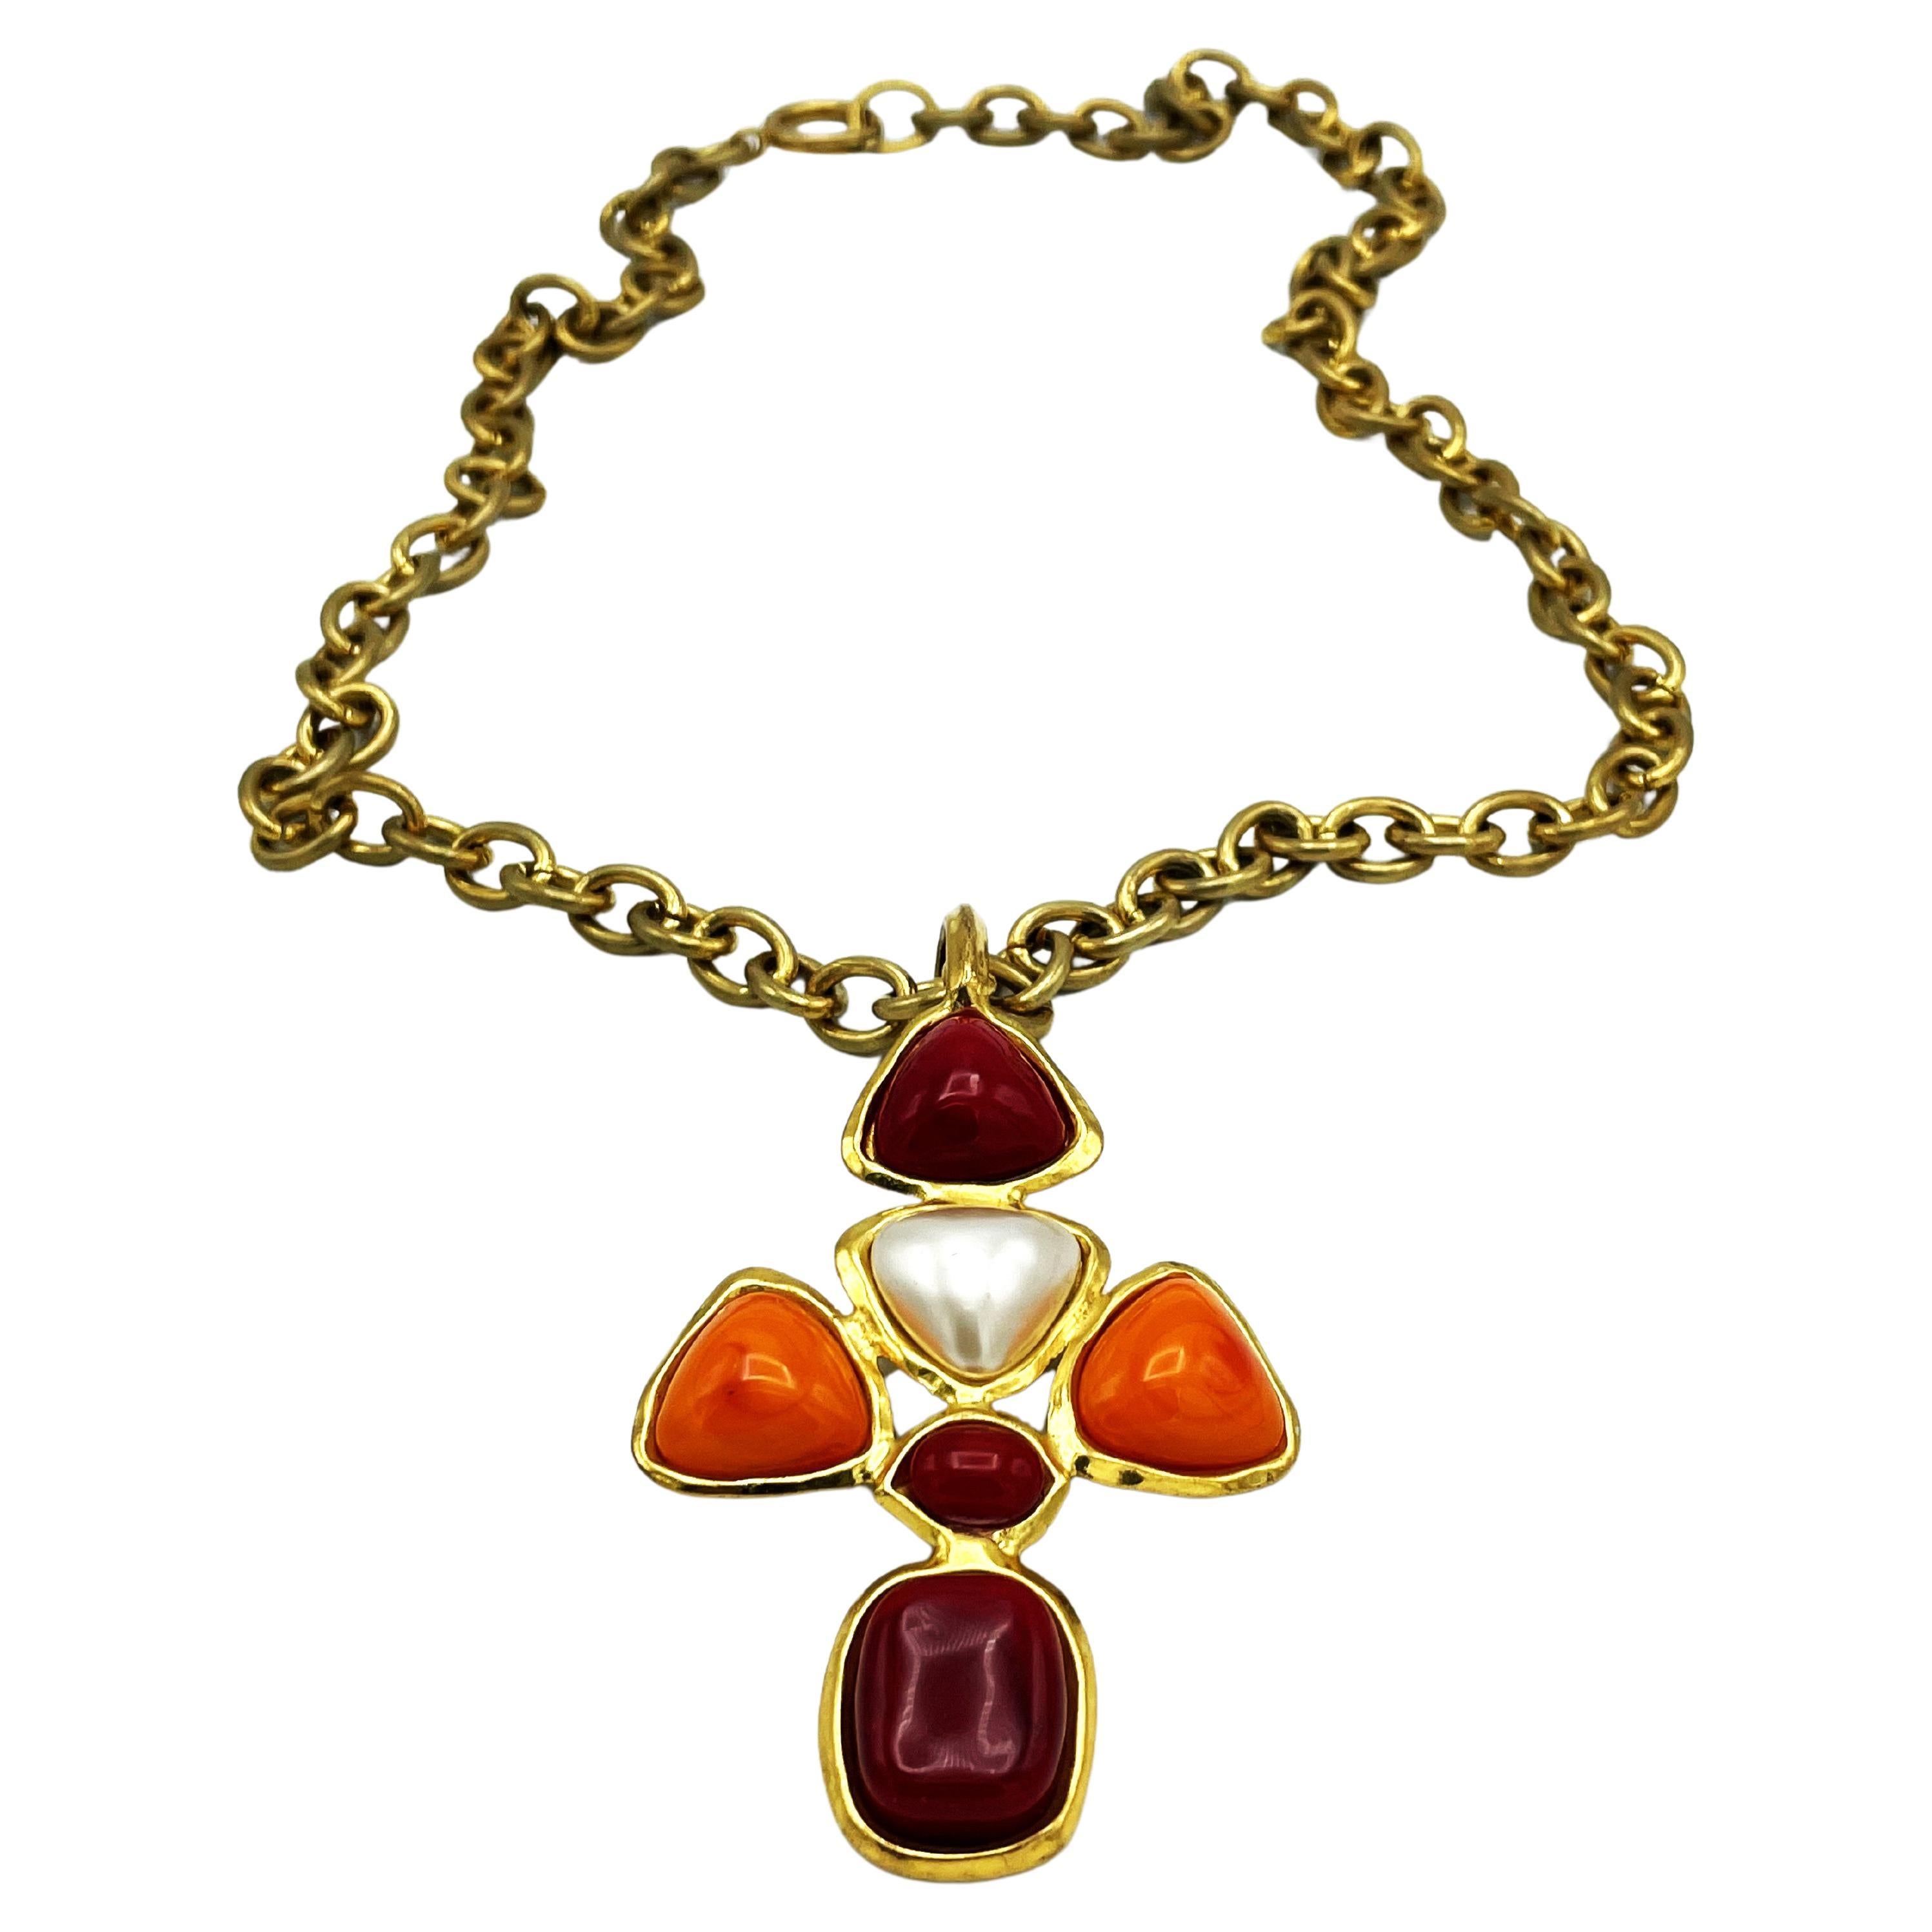 Art Deco CHANEL CROSS NECKLACE wine red + orange Gripoix glass, faux pearl, signed 93 P For Sale